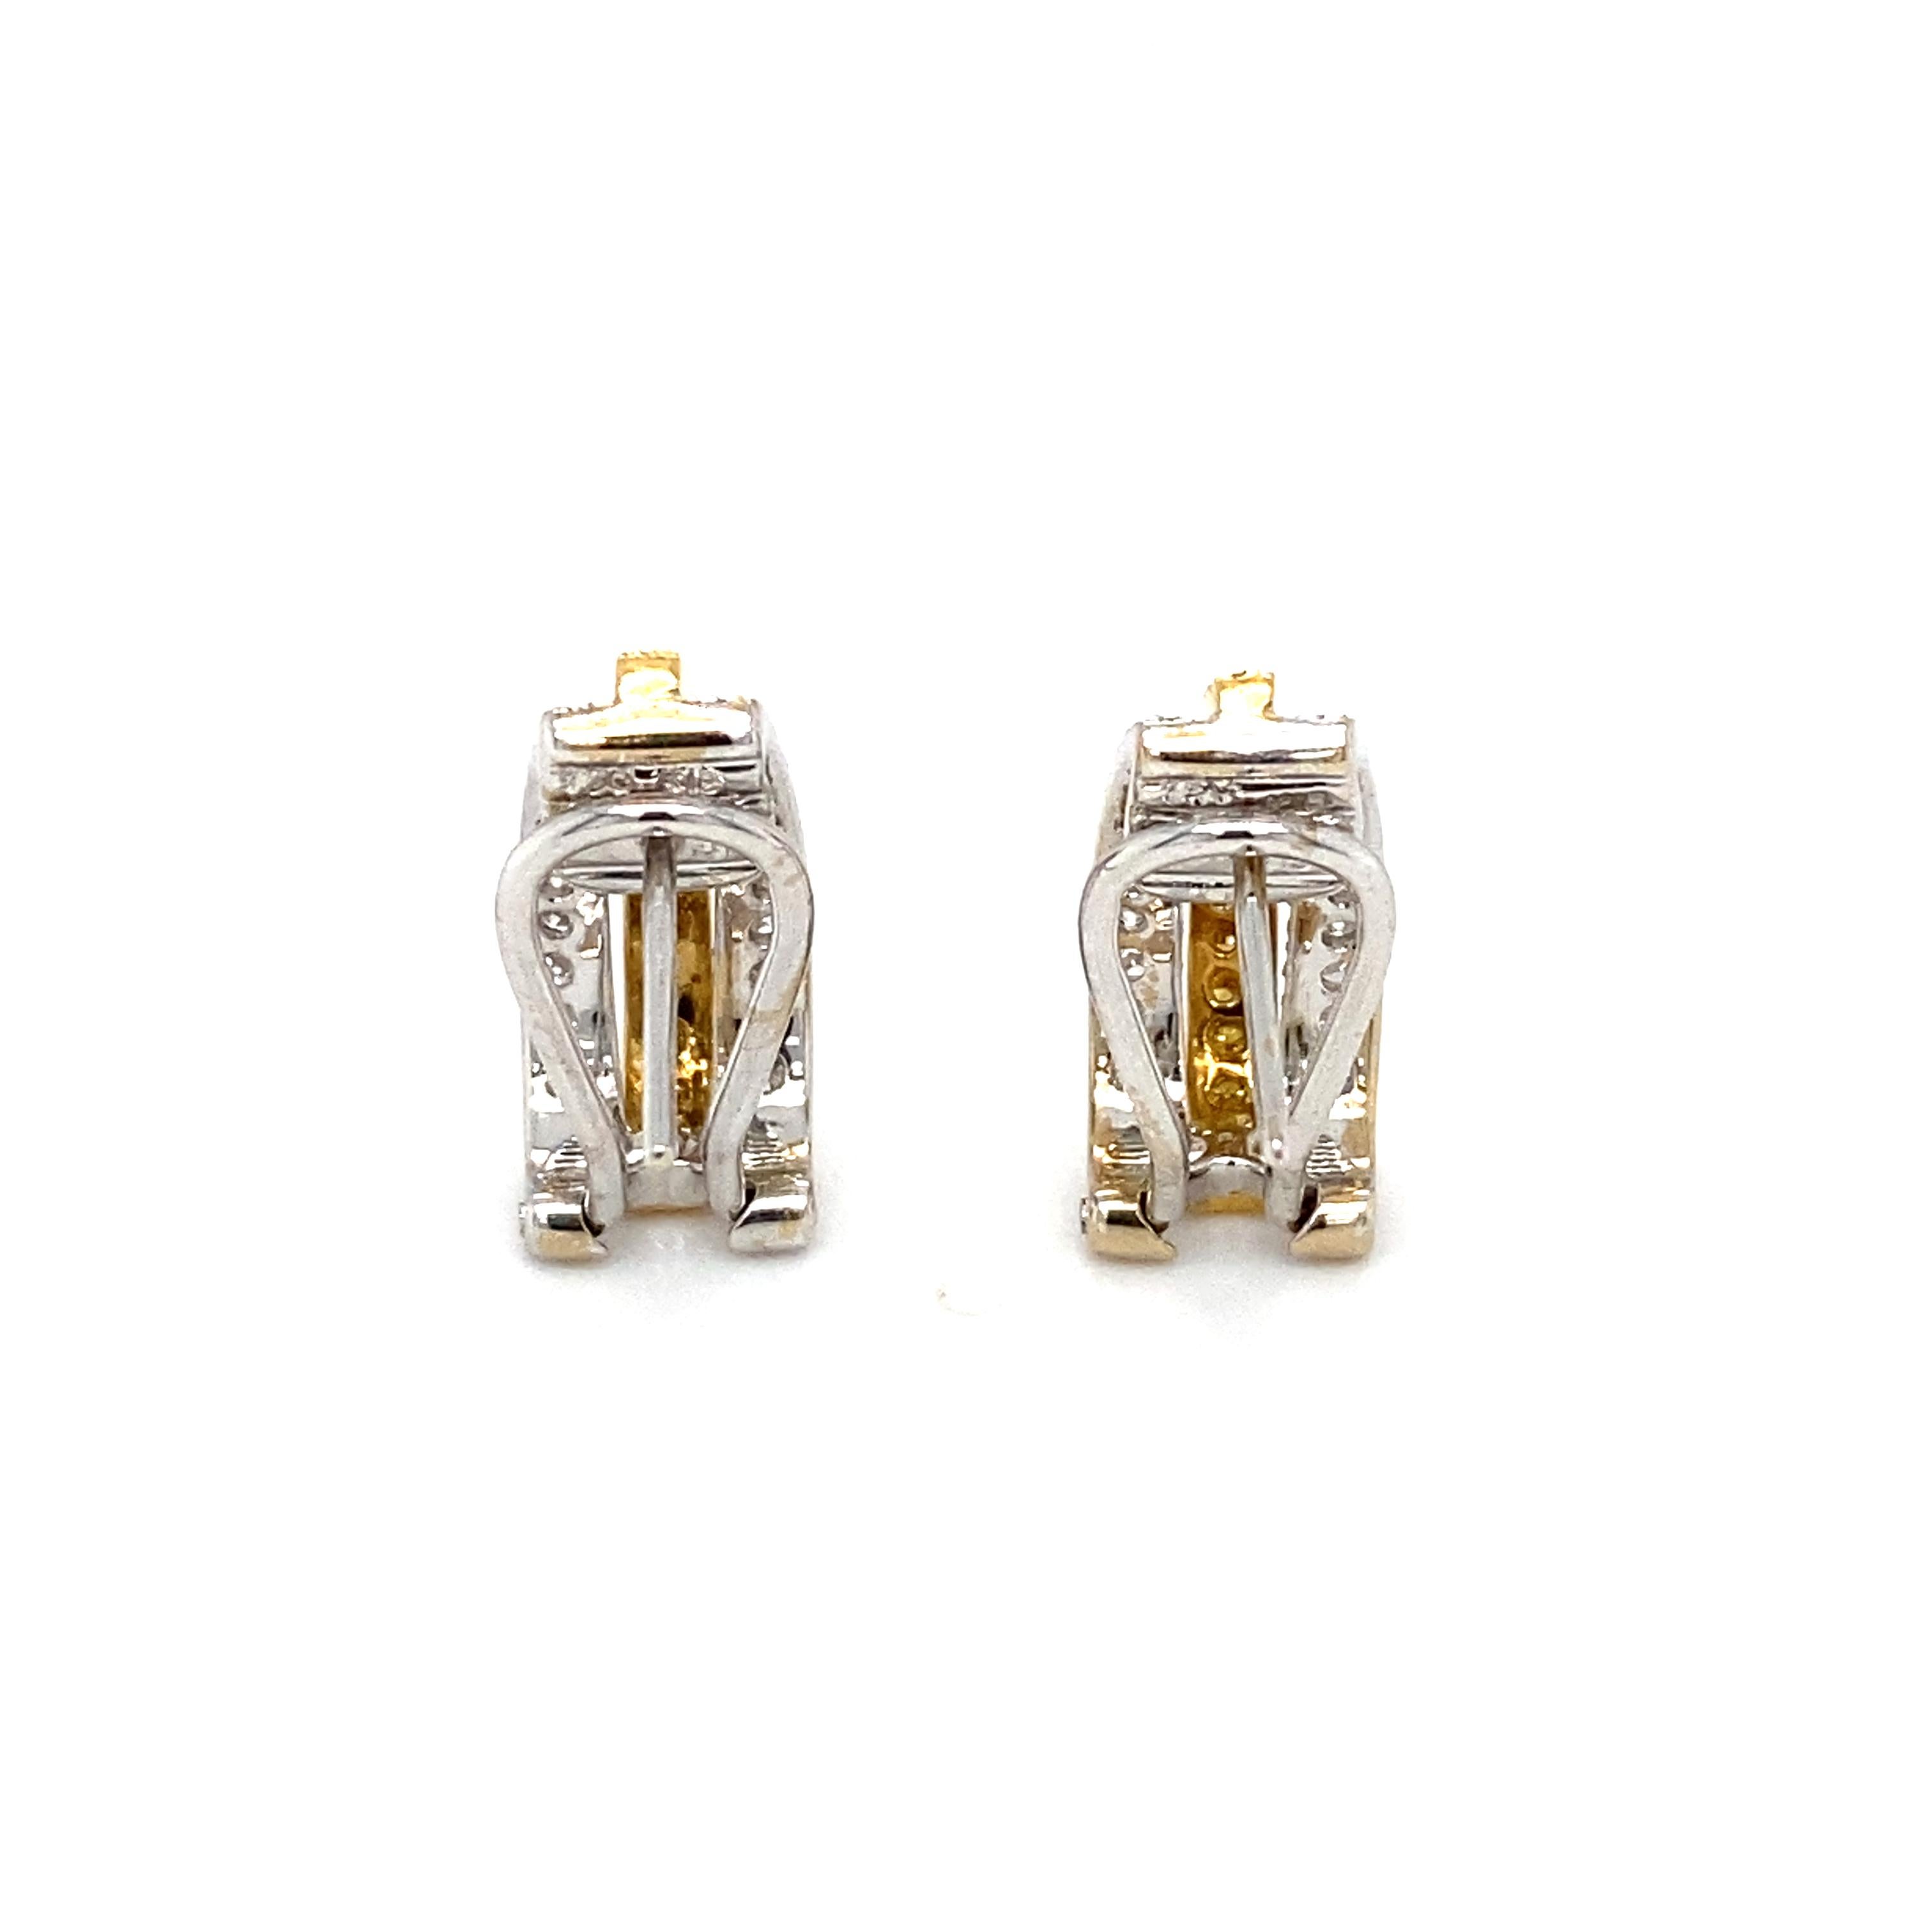 Circa 2010s 2.0 Carat Yellow and White Diamond Earrings in 18 Karat Gold  In Excellent Condition For Sale In Atlanta, GA